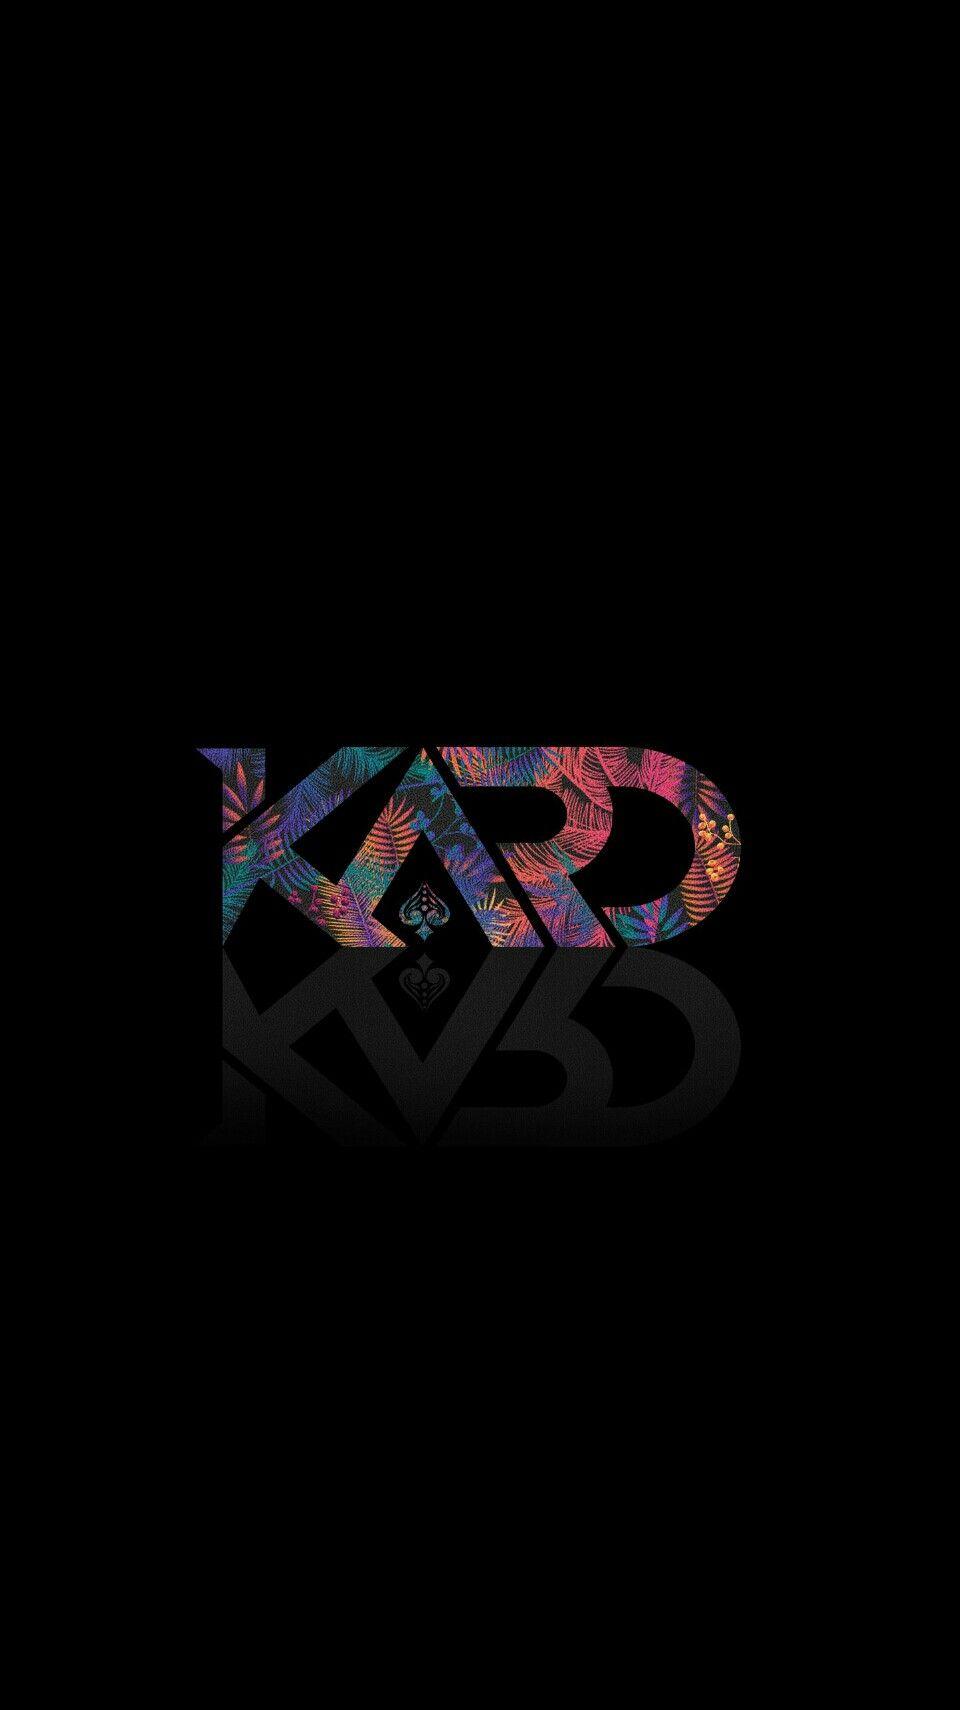 KARD BM y Somin wallpaper by Trizze  Download on ZEDGE  bb2c